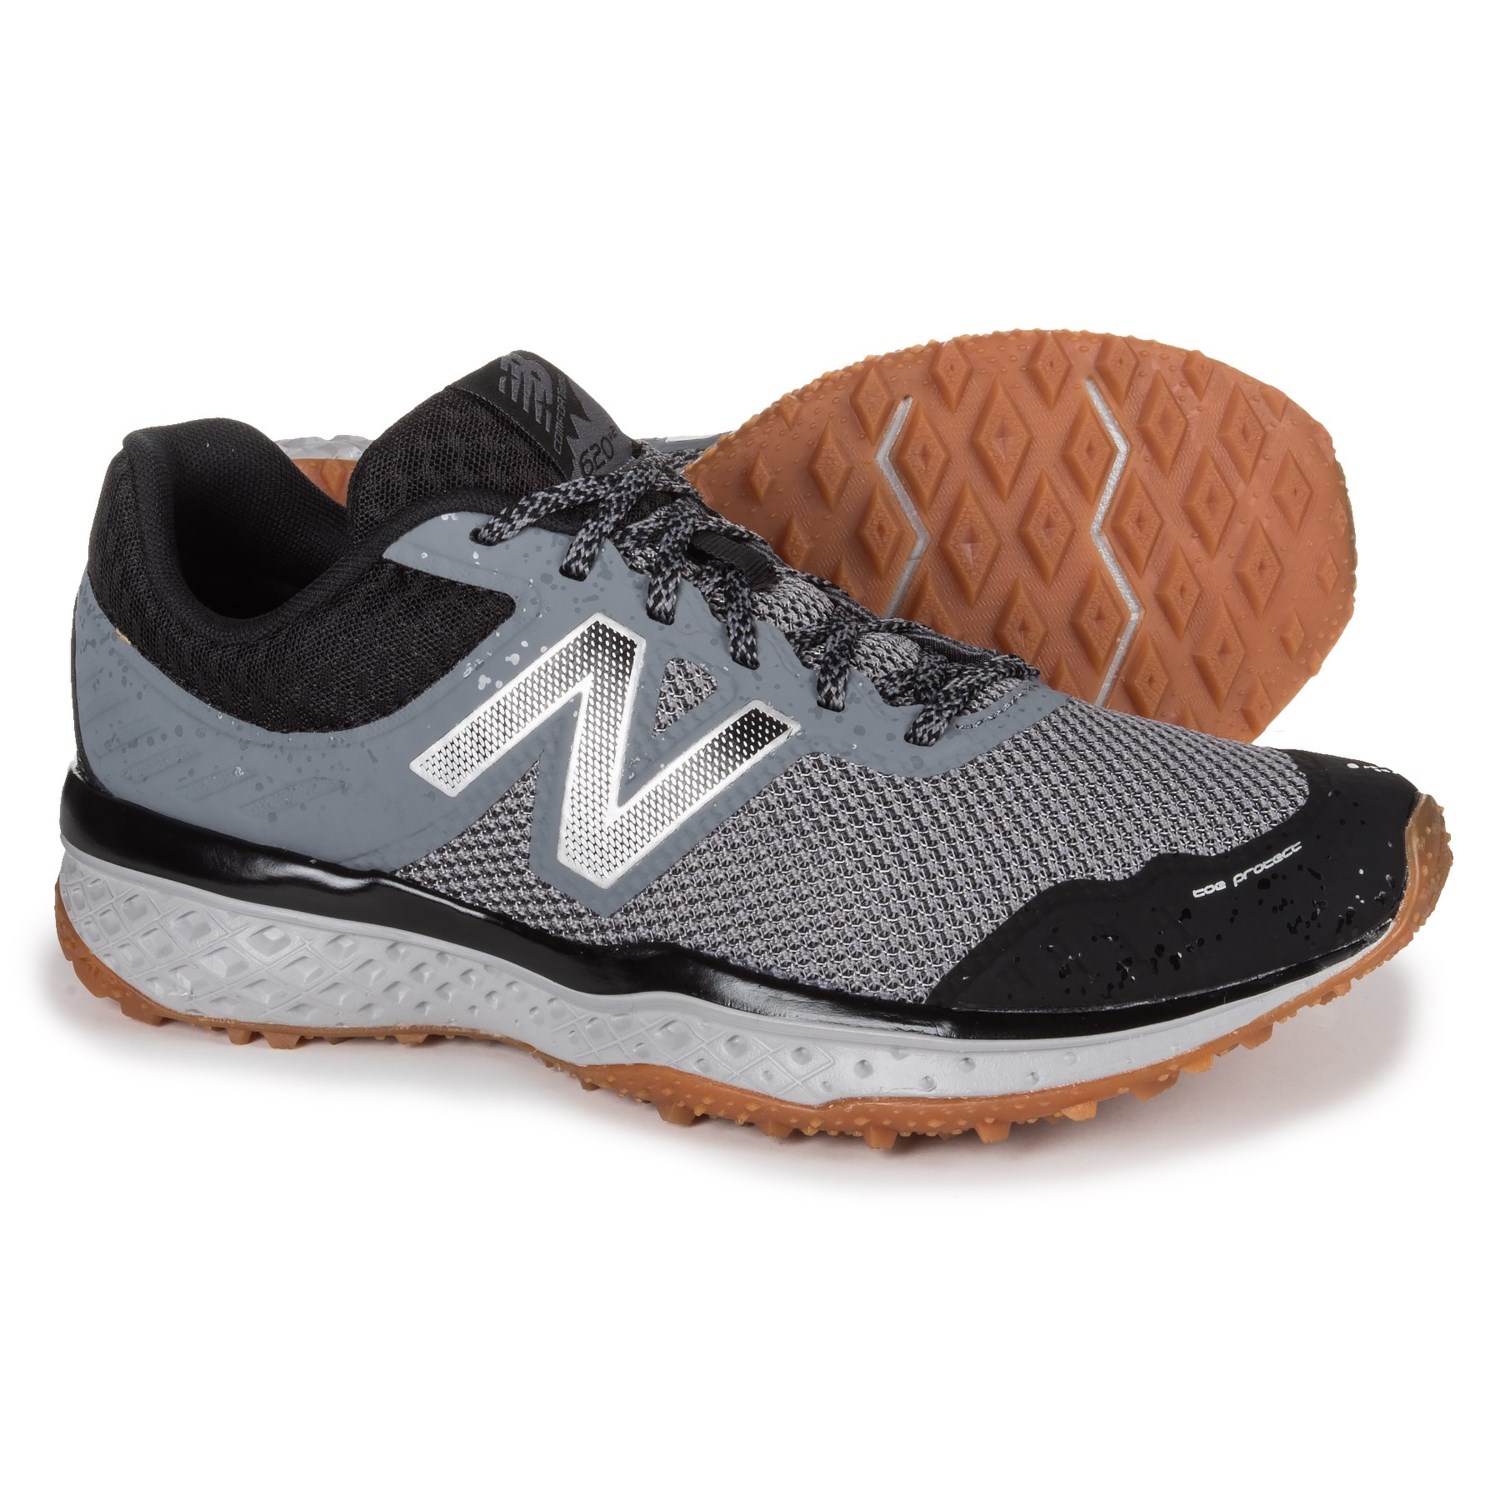 Cheap Lego Plates: New Balance 713 Review